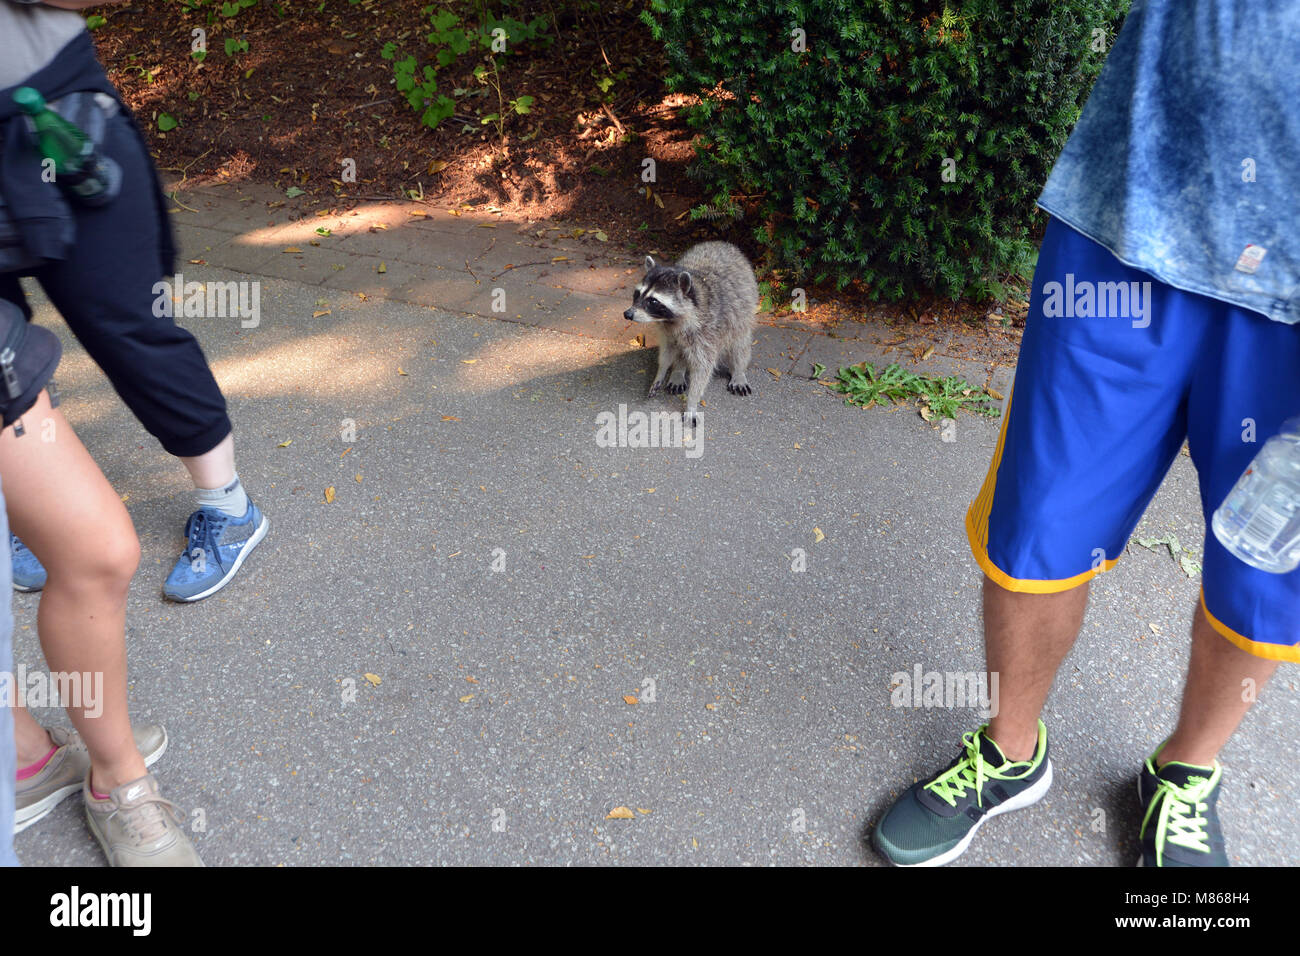 Racoon amuses tourists, Stanley Park, Vancouver, Canada. Stock Photo